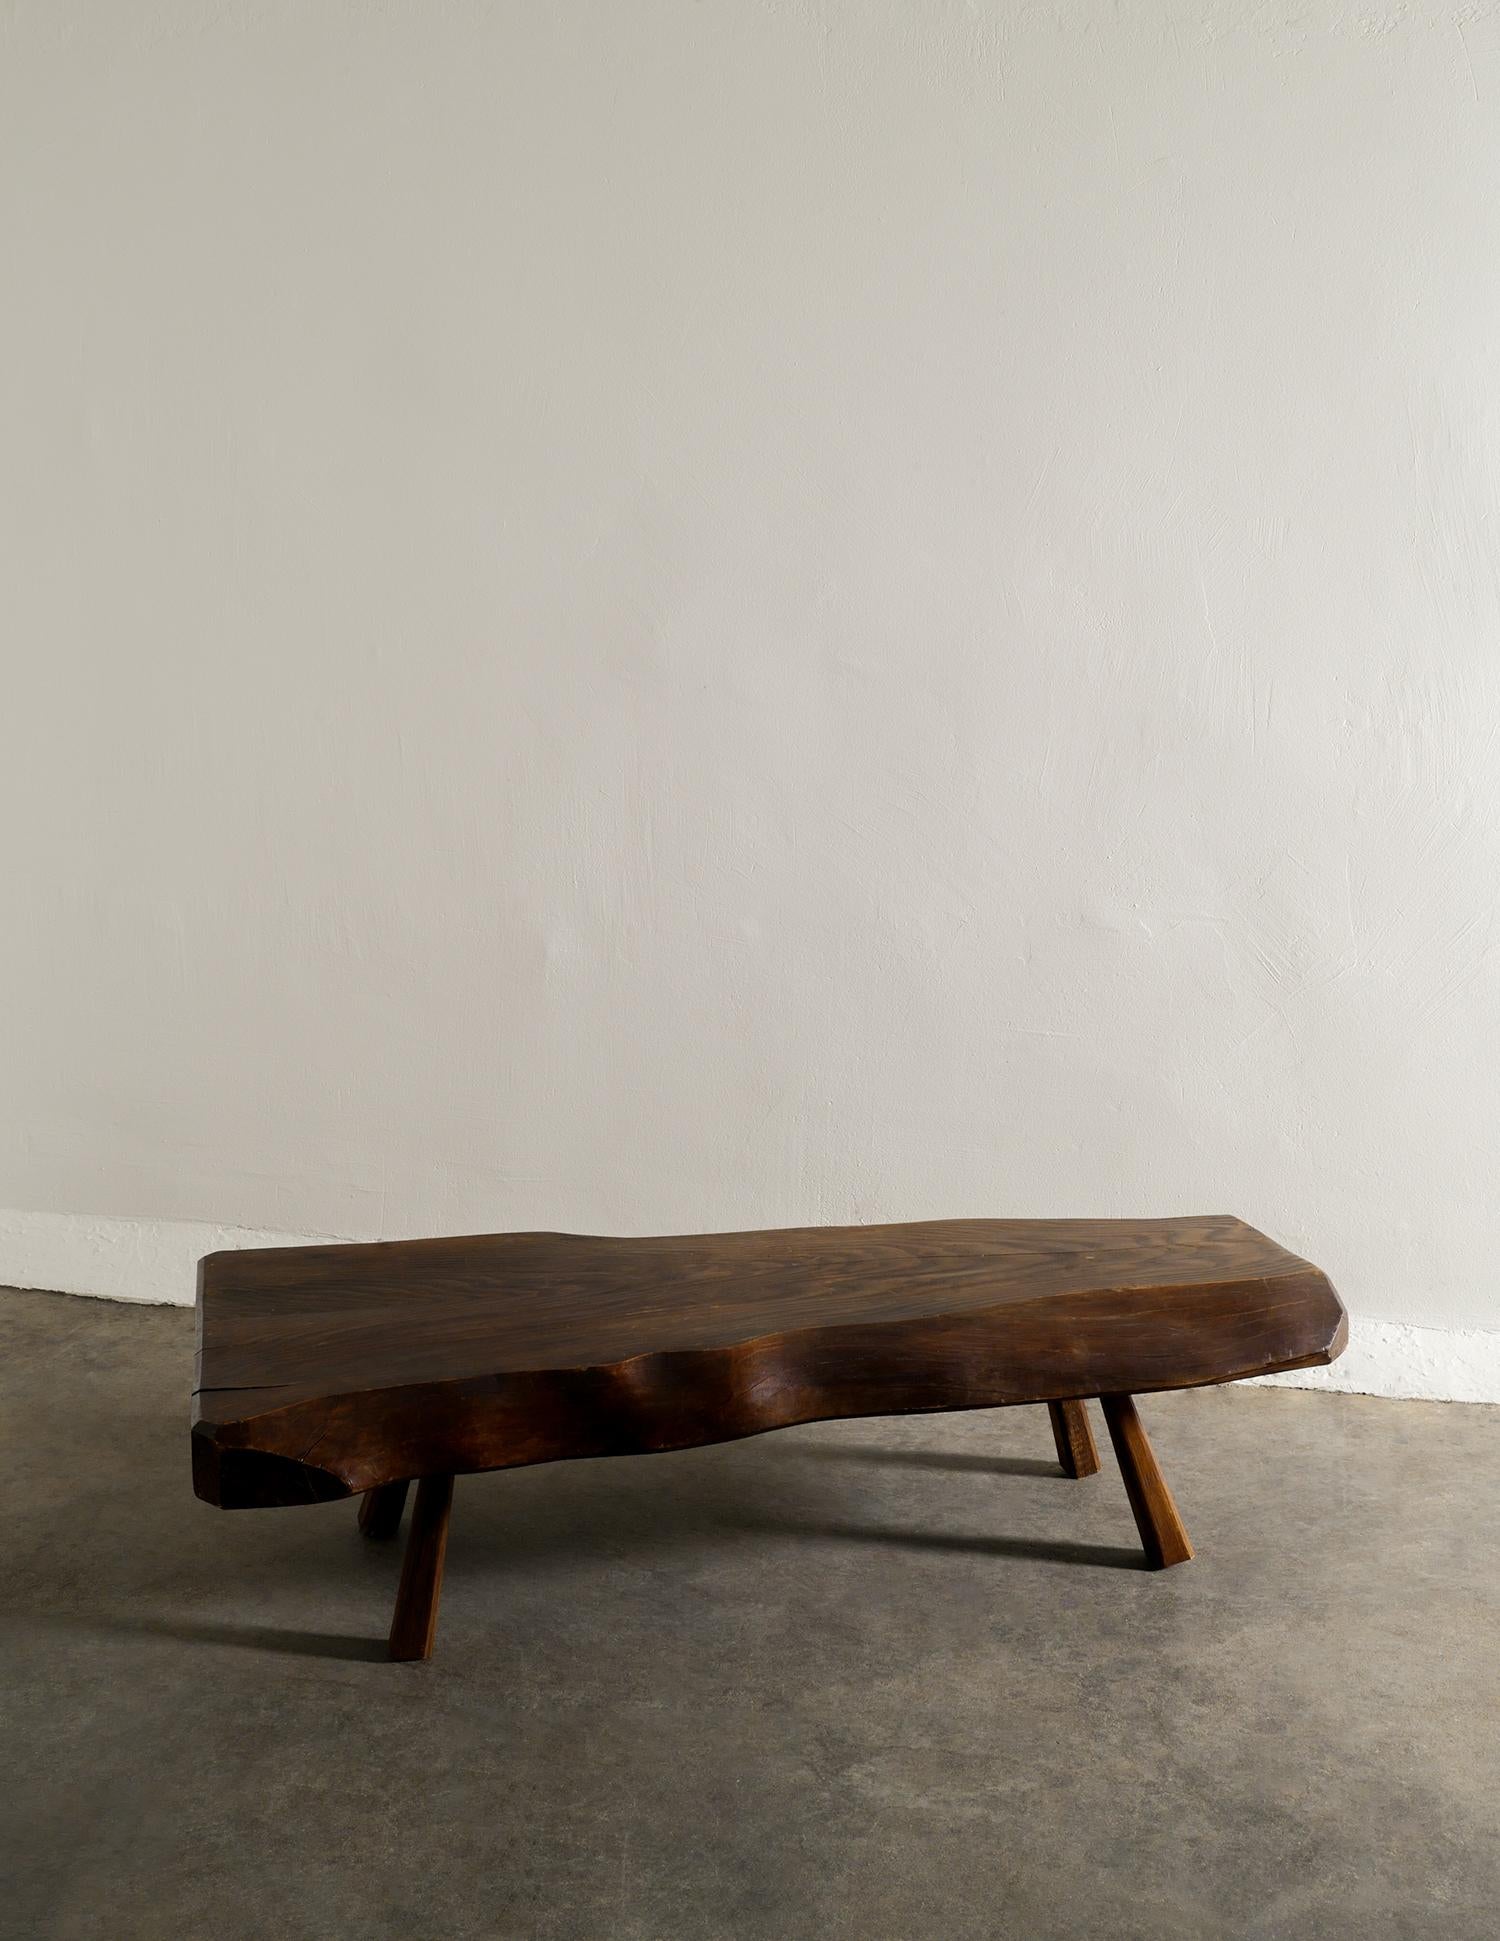 Elm French Midcentury Wooden Coffee Sofa Table in a Brutalist Freeform Style, 1960s